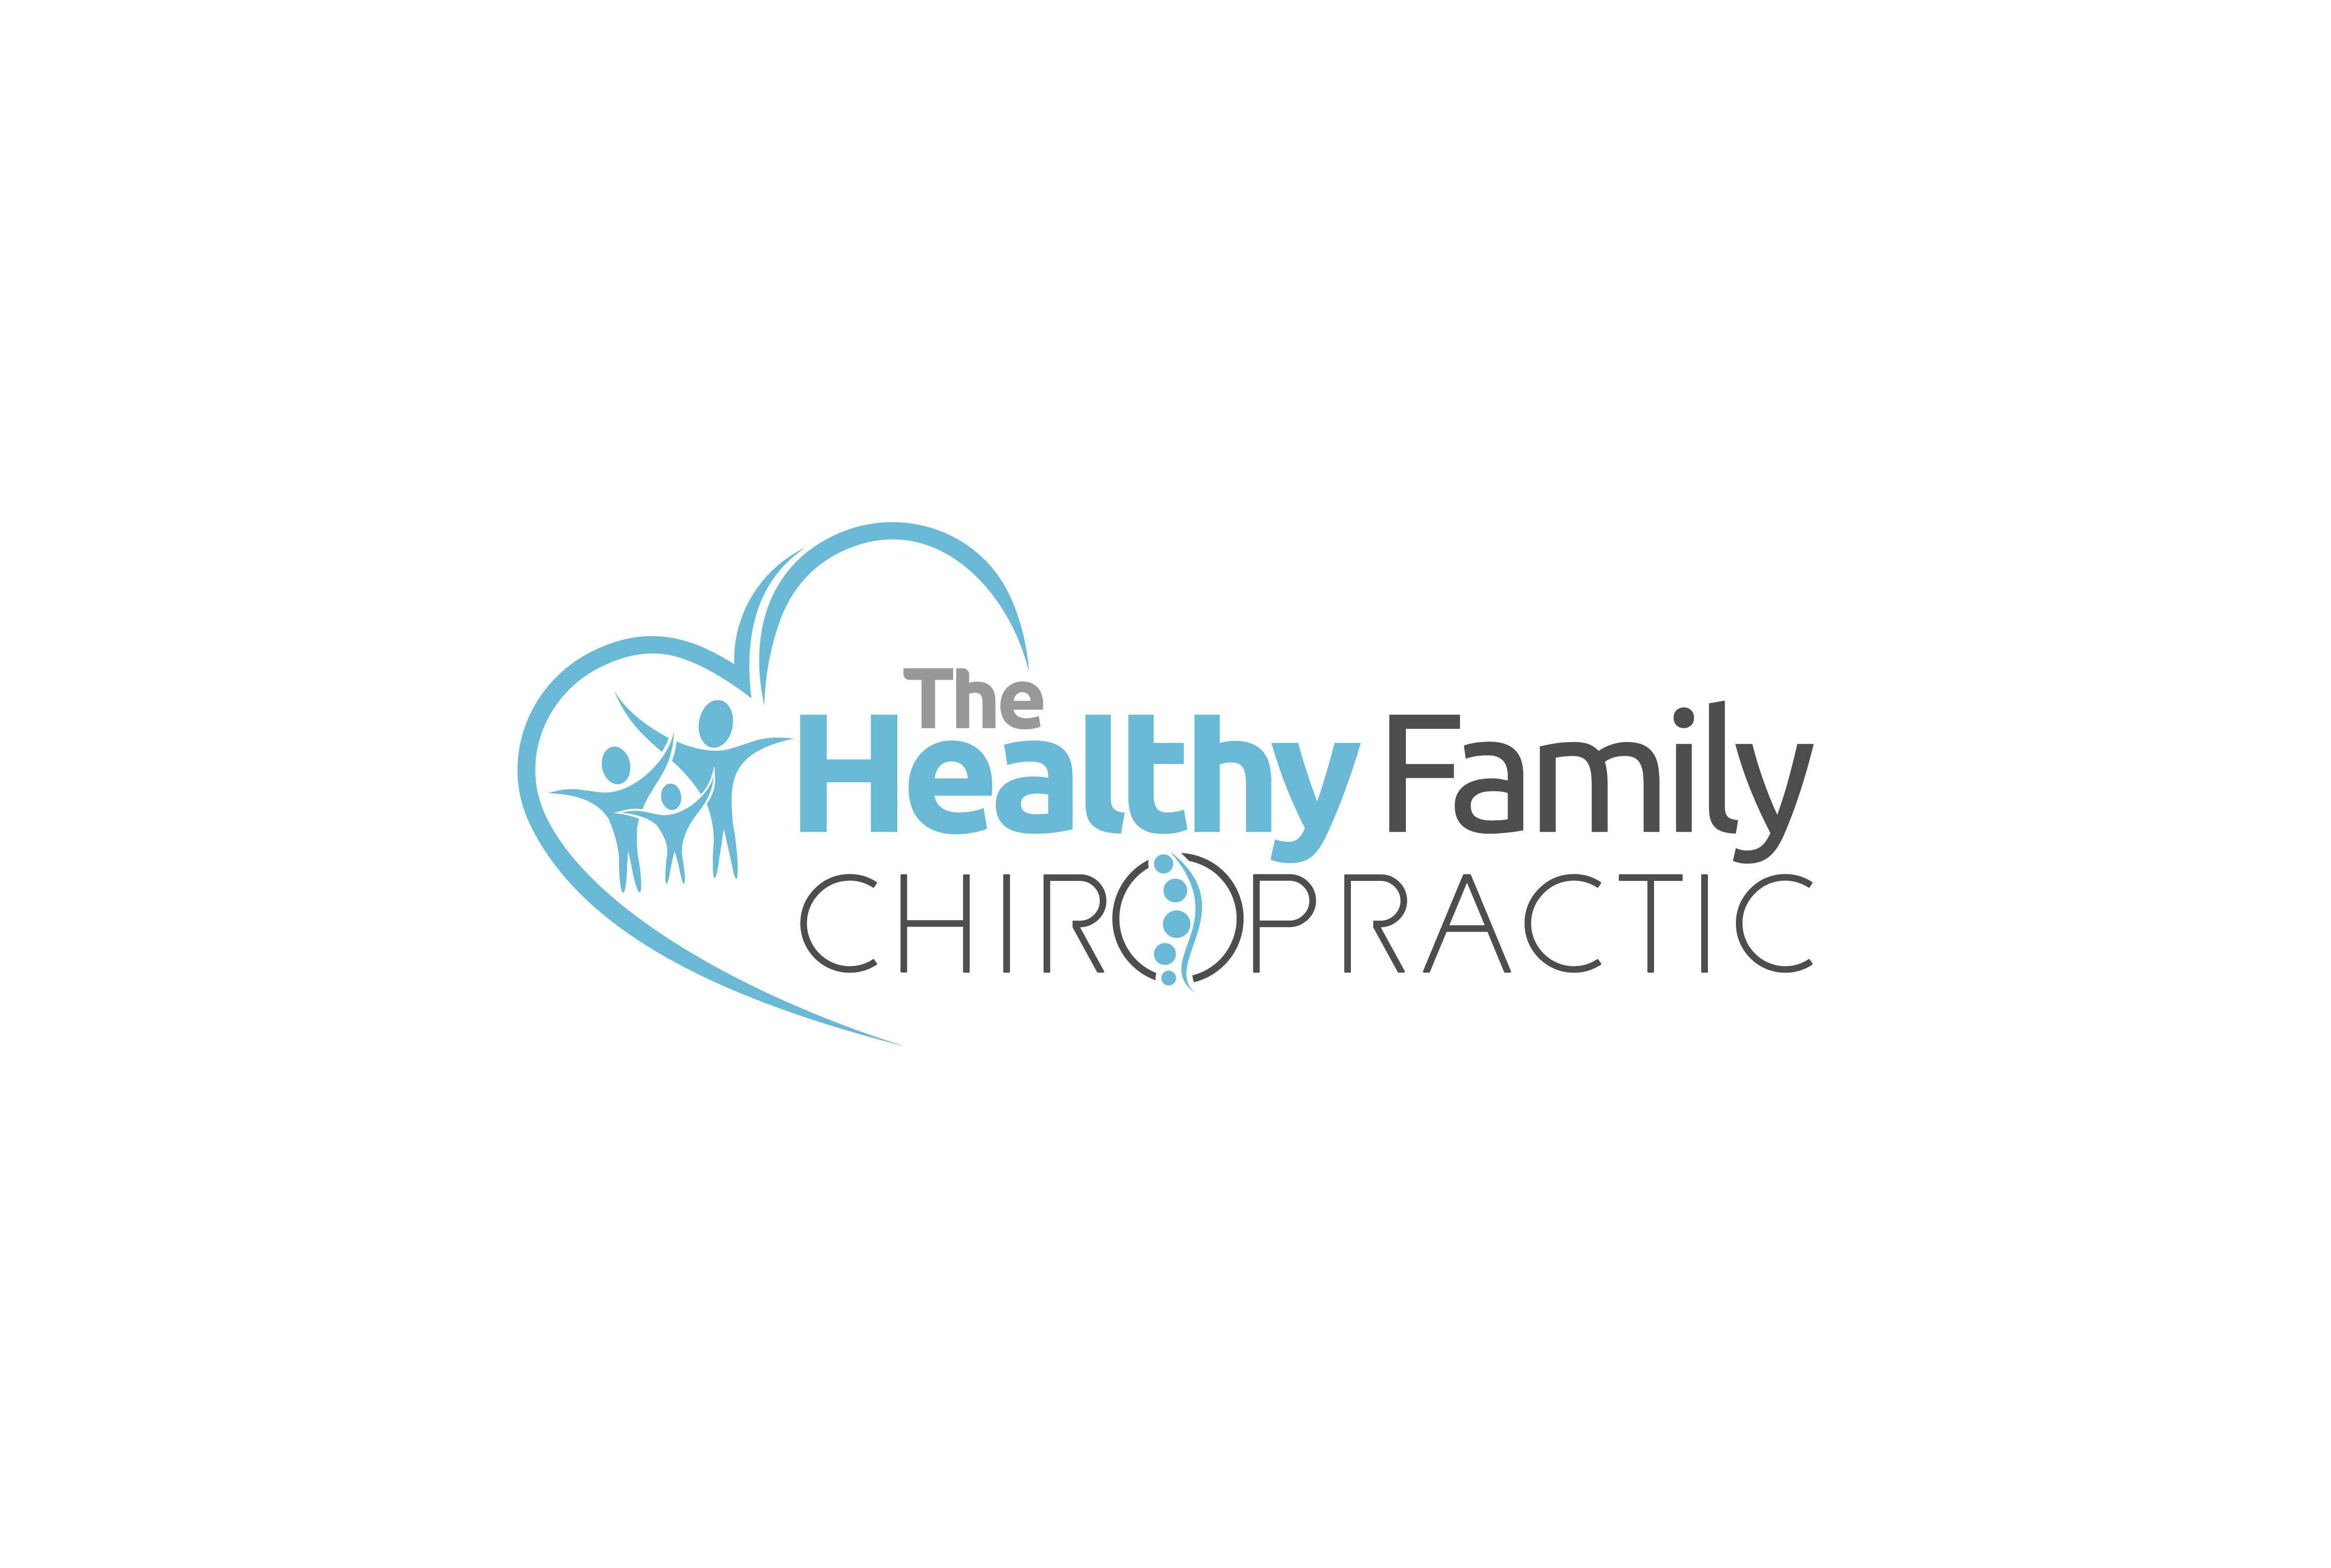 The Healthy Family Chiropractic